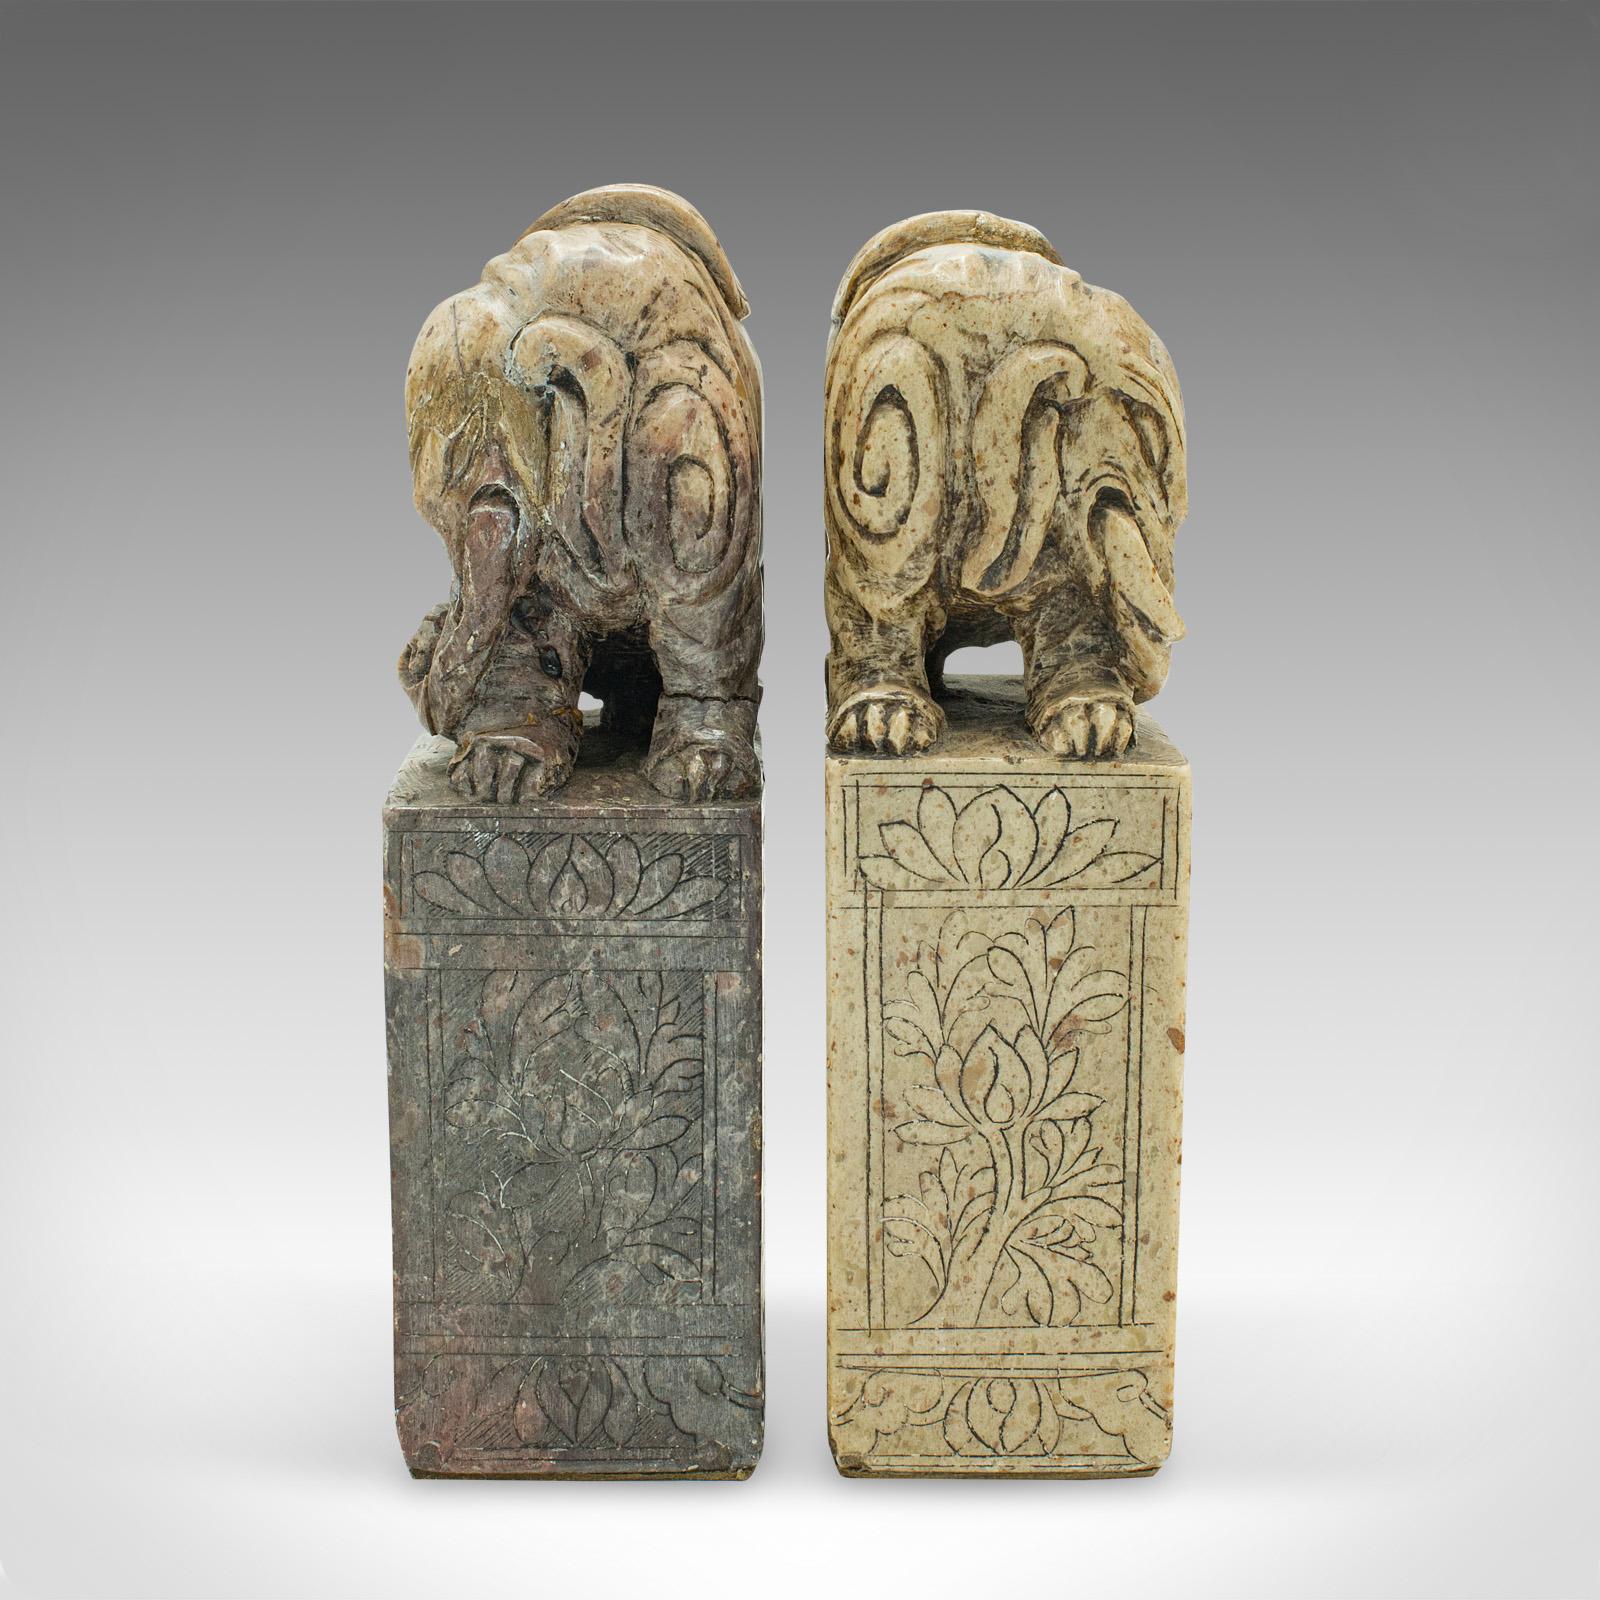 This is a pair of antique Oriental bookends. A Chinese, carved soapstone decorative book rest, dating to the early Victorian period, circa 1850.

Fascinating and distinctive bookends from the Qing period
Displaying a desirable aged patina and in